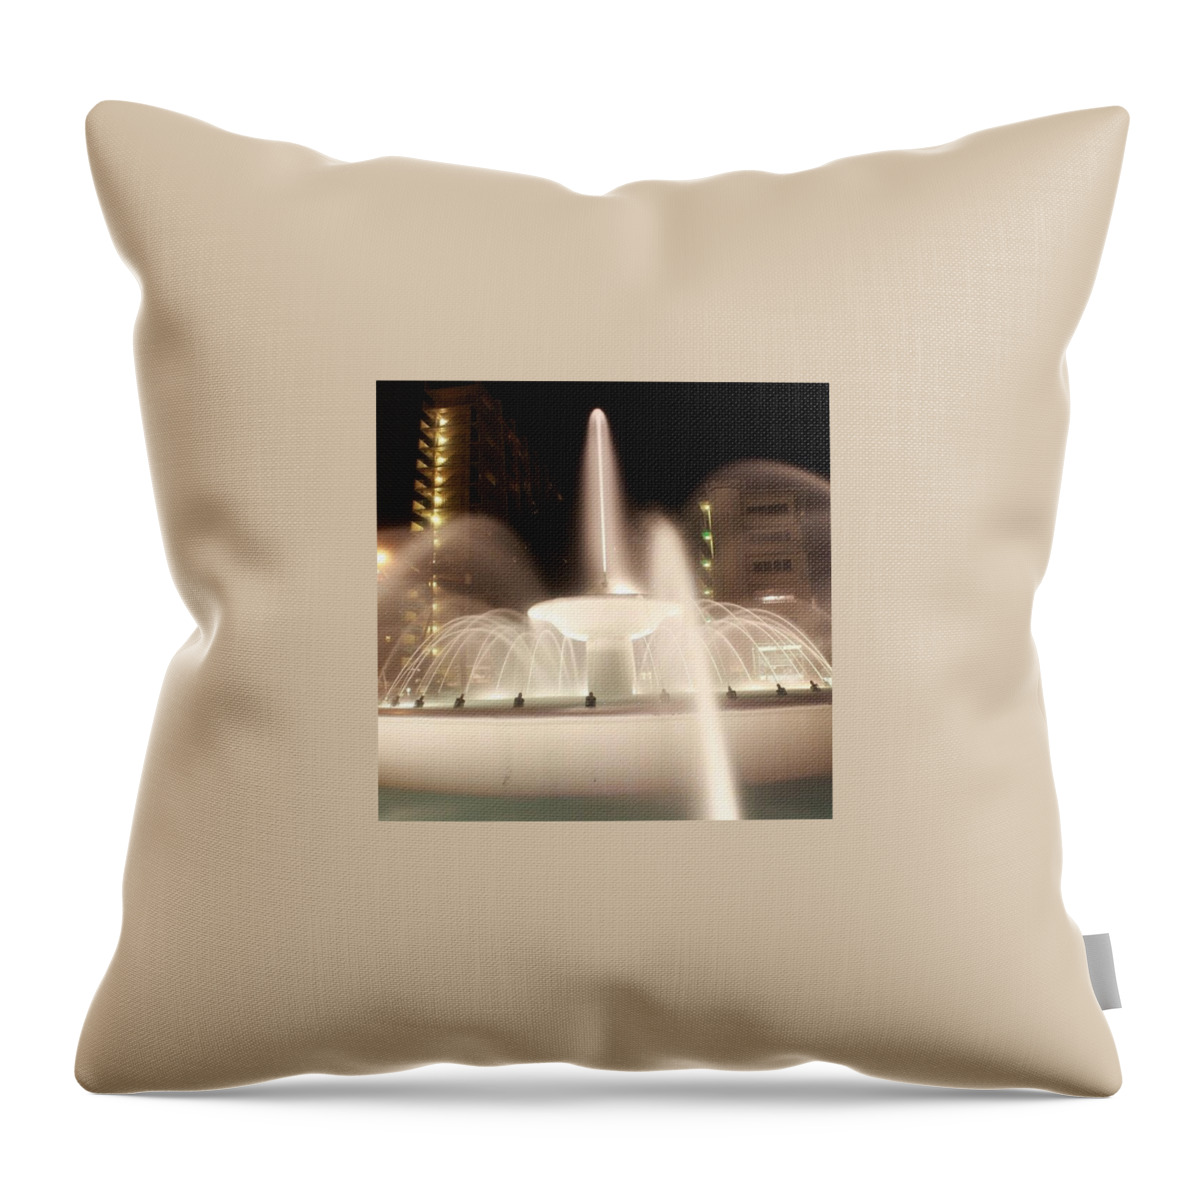 Fountain Throw Pillow featuring the photograph Lights Fountain by Teddy Marcos